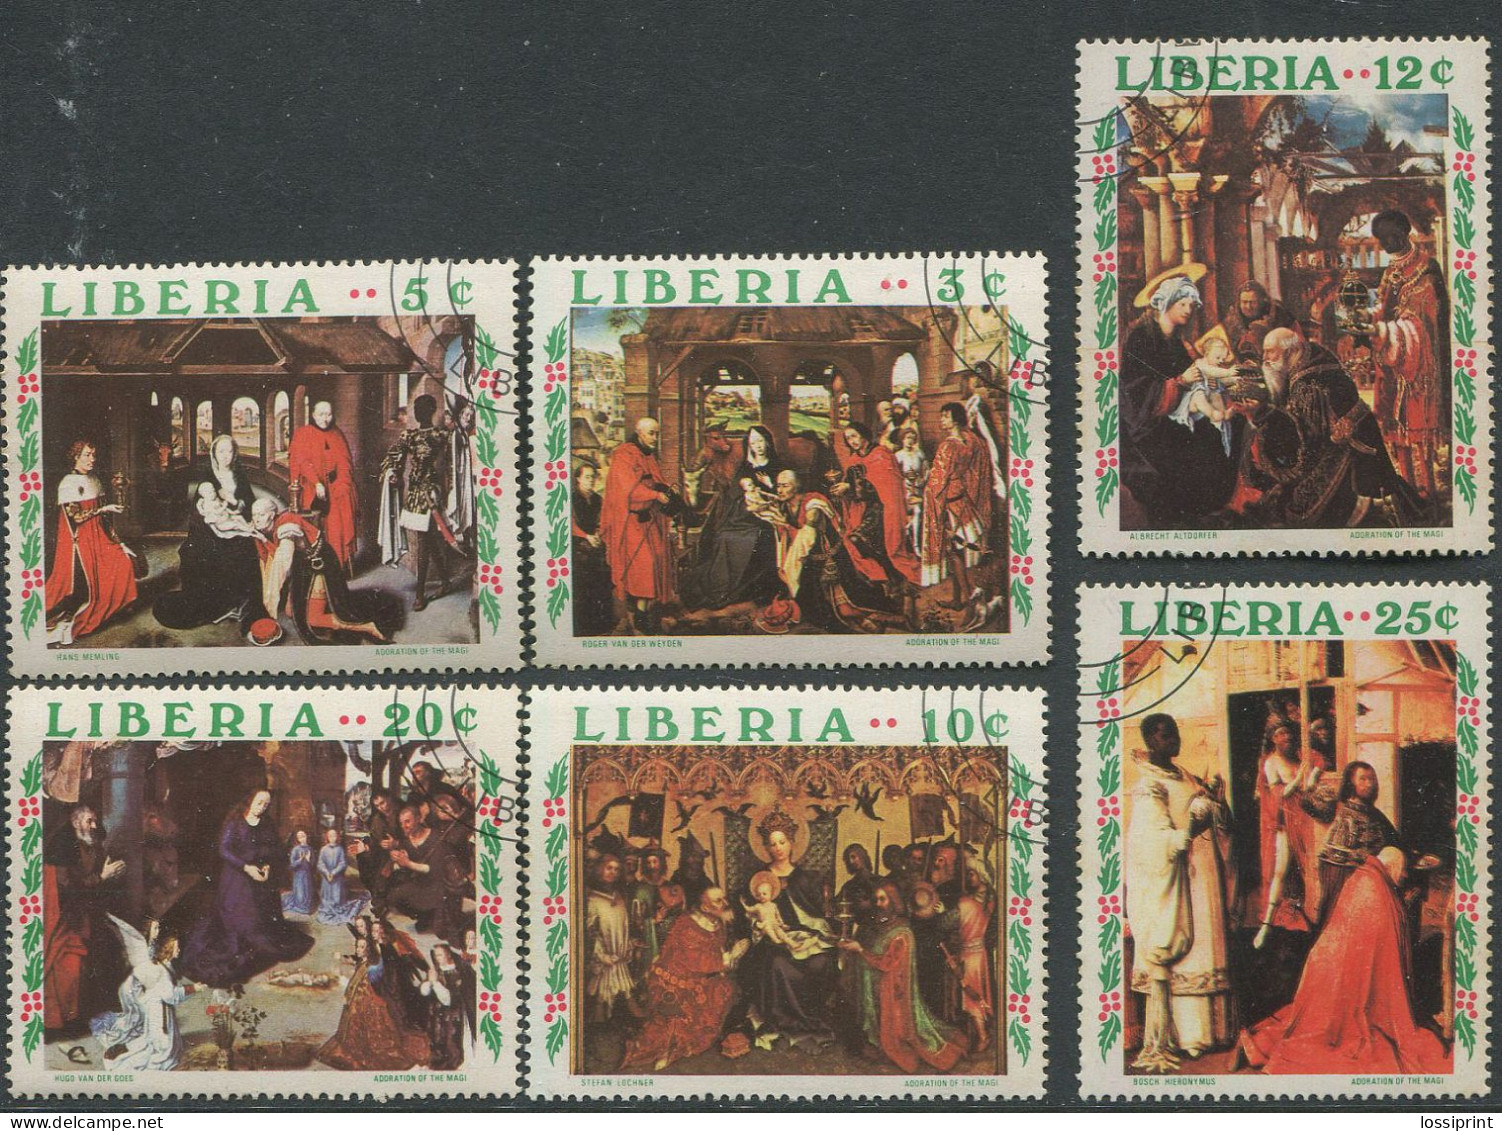 Liberia:Used Stamps Serie Paintings, Adoration Of The Magi - Religious